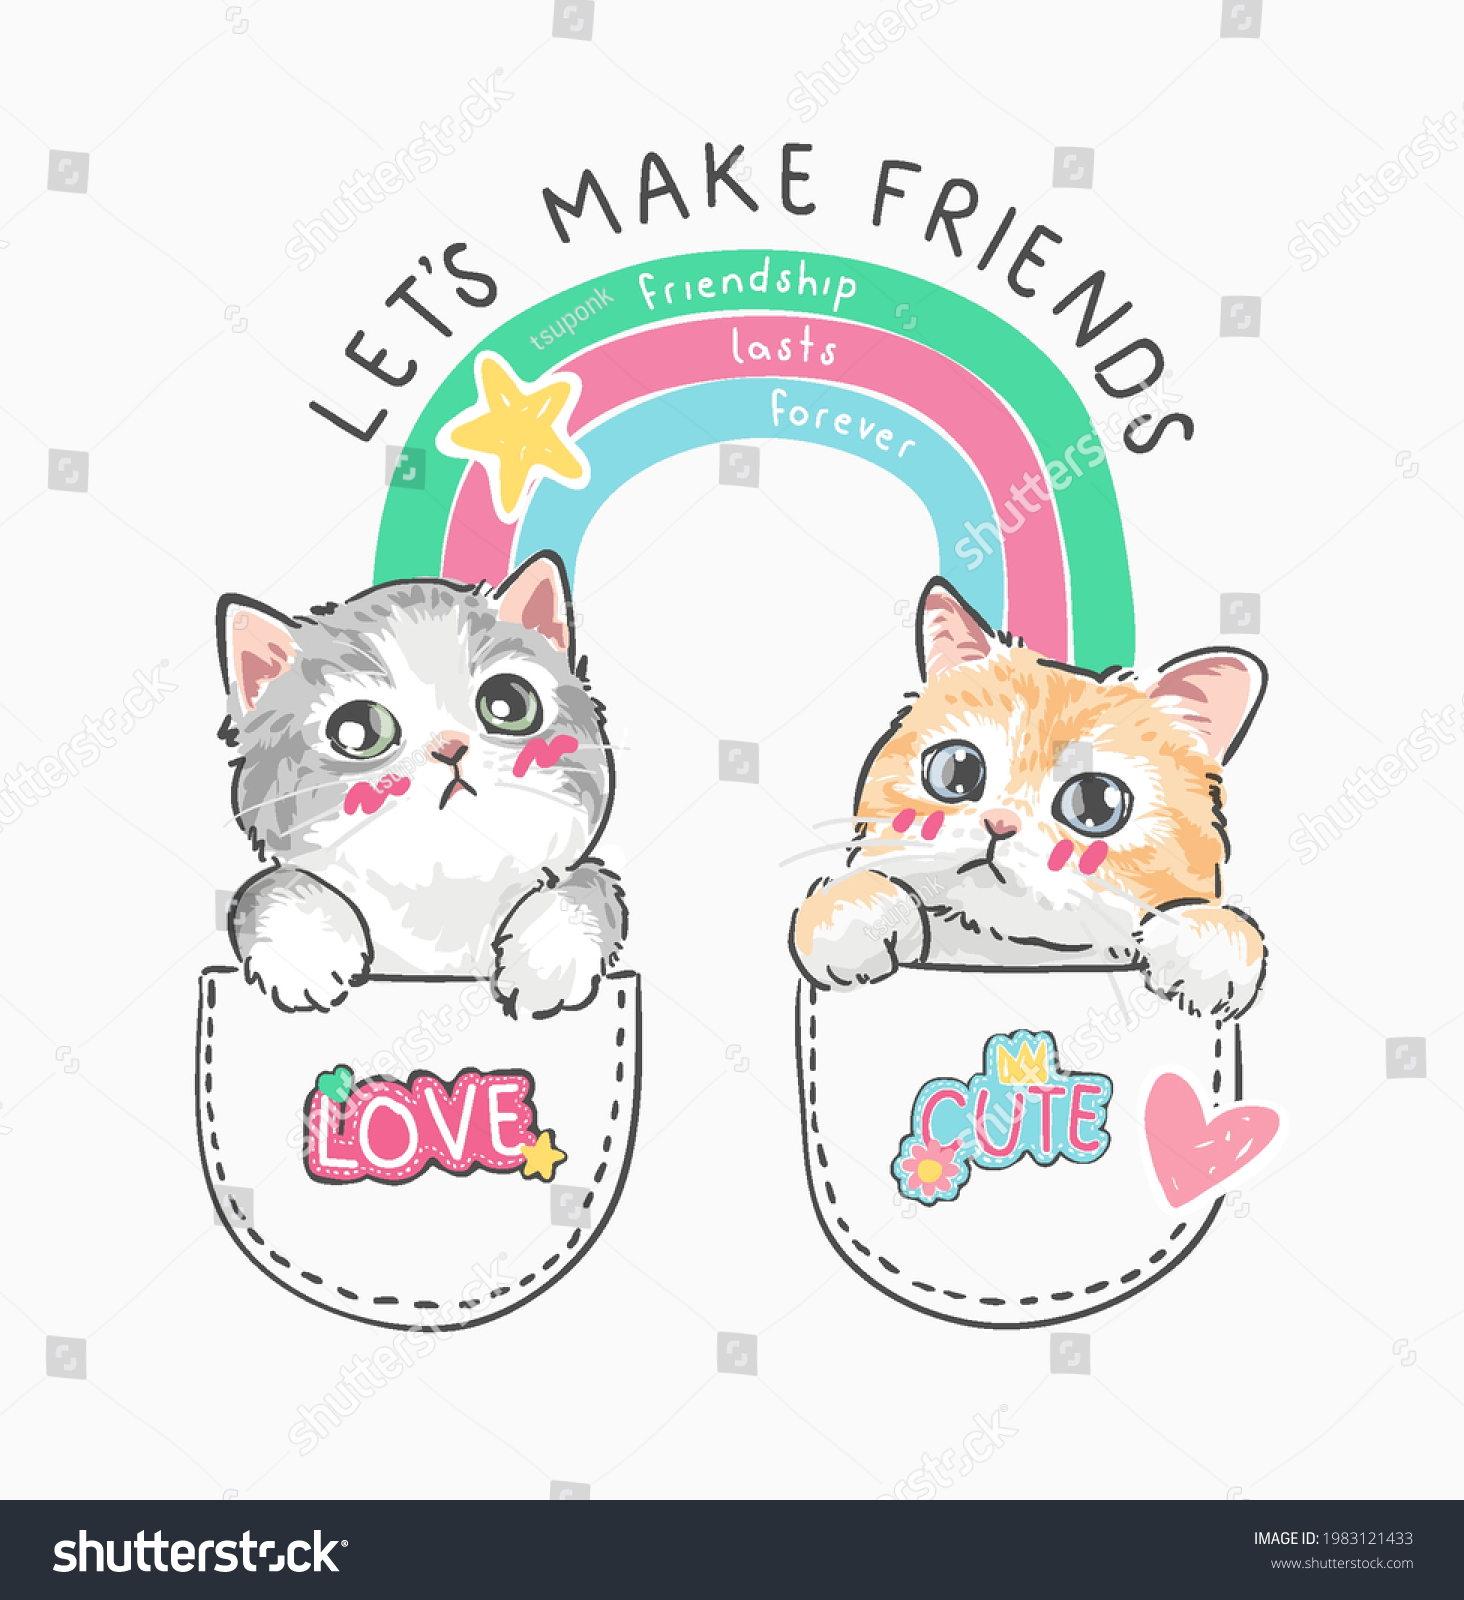 SVG of make friends slogan with cartoon cats couple in pockets vector illustration svg